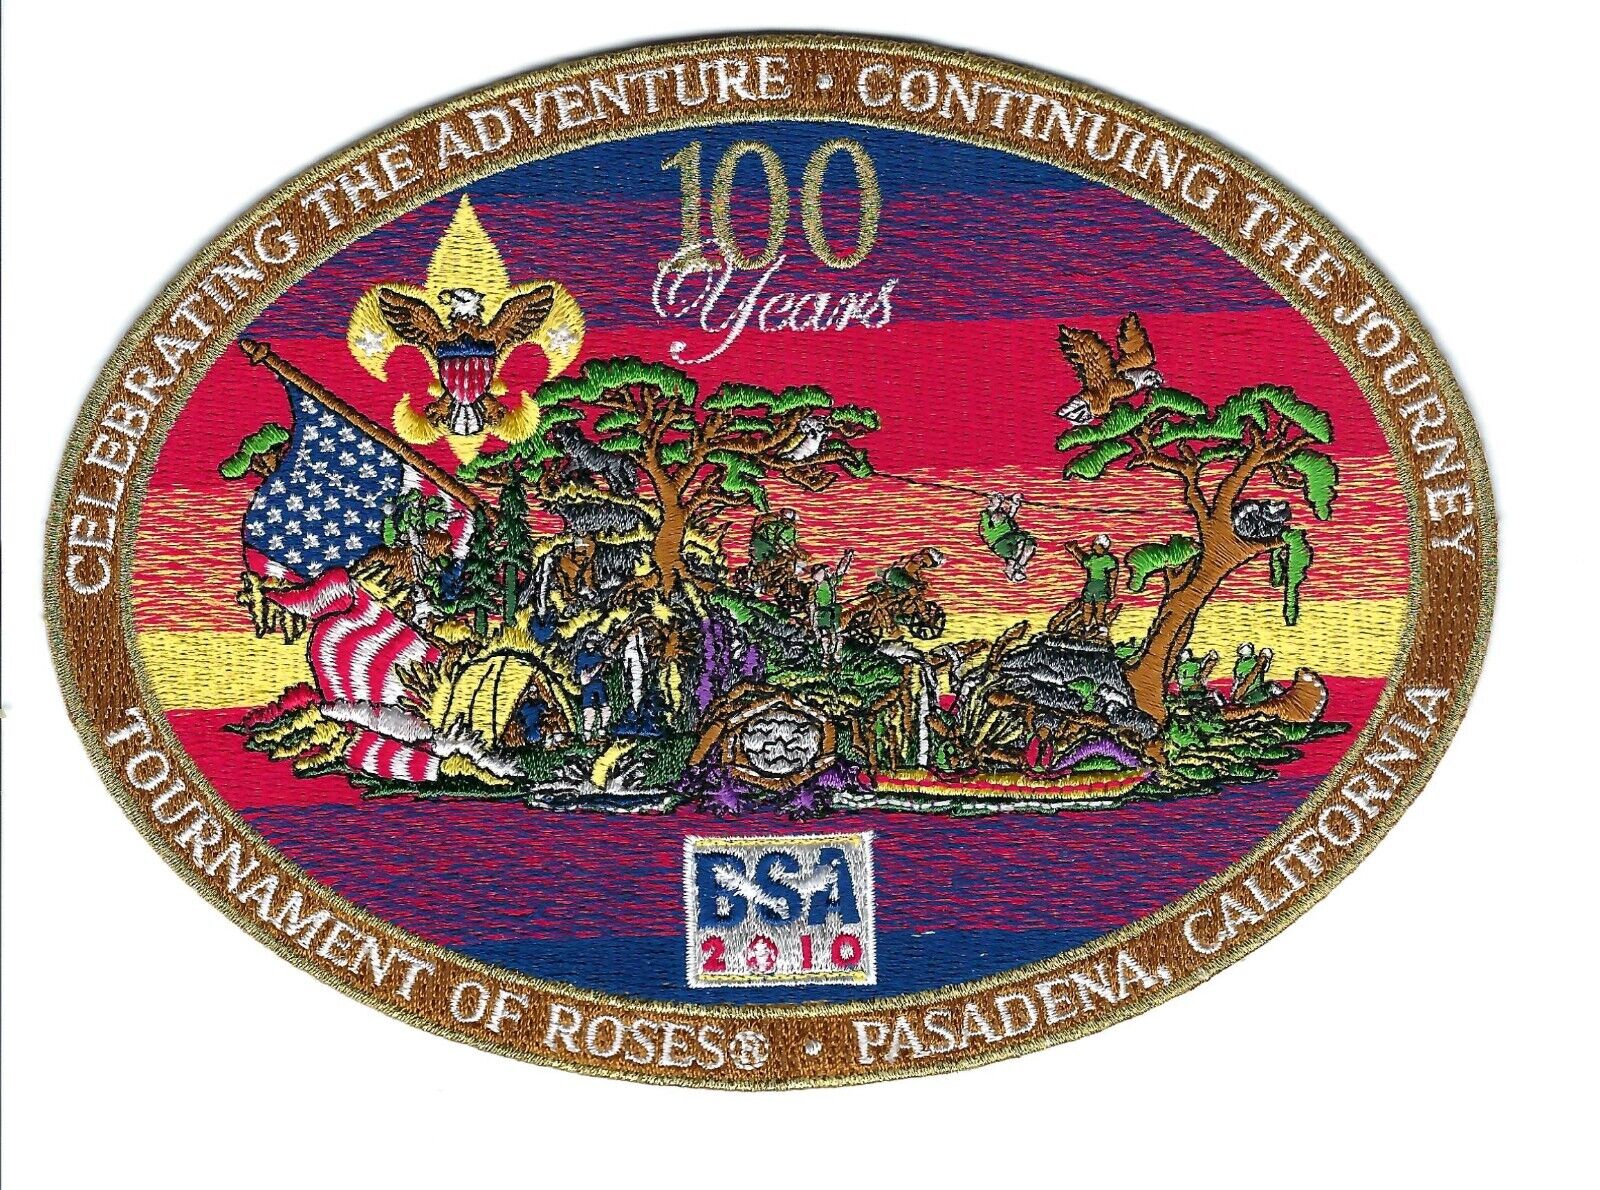 Set of 4 Boy Scouts of America Jacket Patches celebrating 100 Years of Scouting